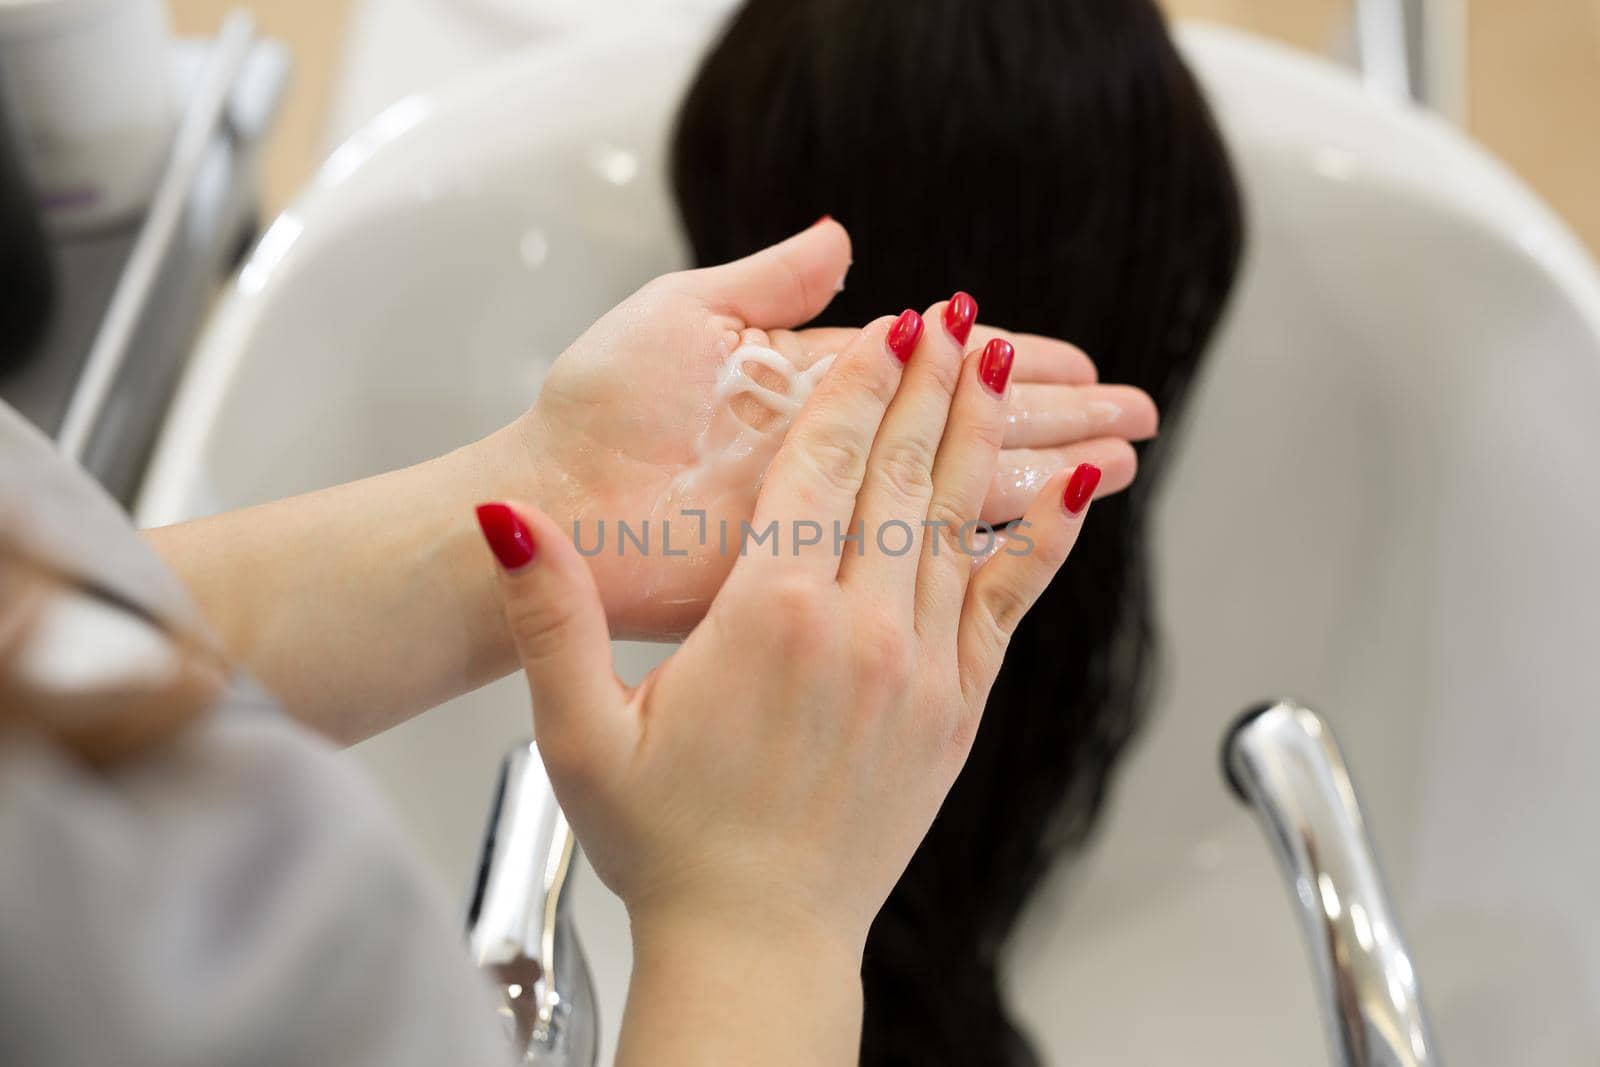 Close-up of the hand of a hairdresser who rubs moisturizing oil into the client's hair. Hairdresser applies a therapeutic mask on the girl's hair.